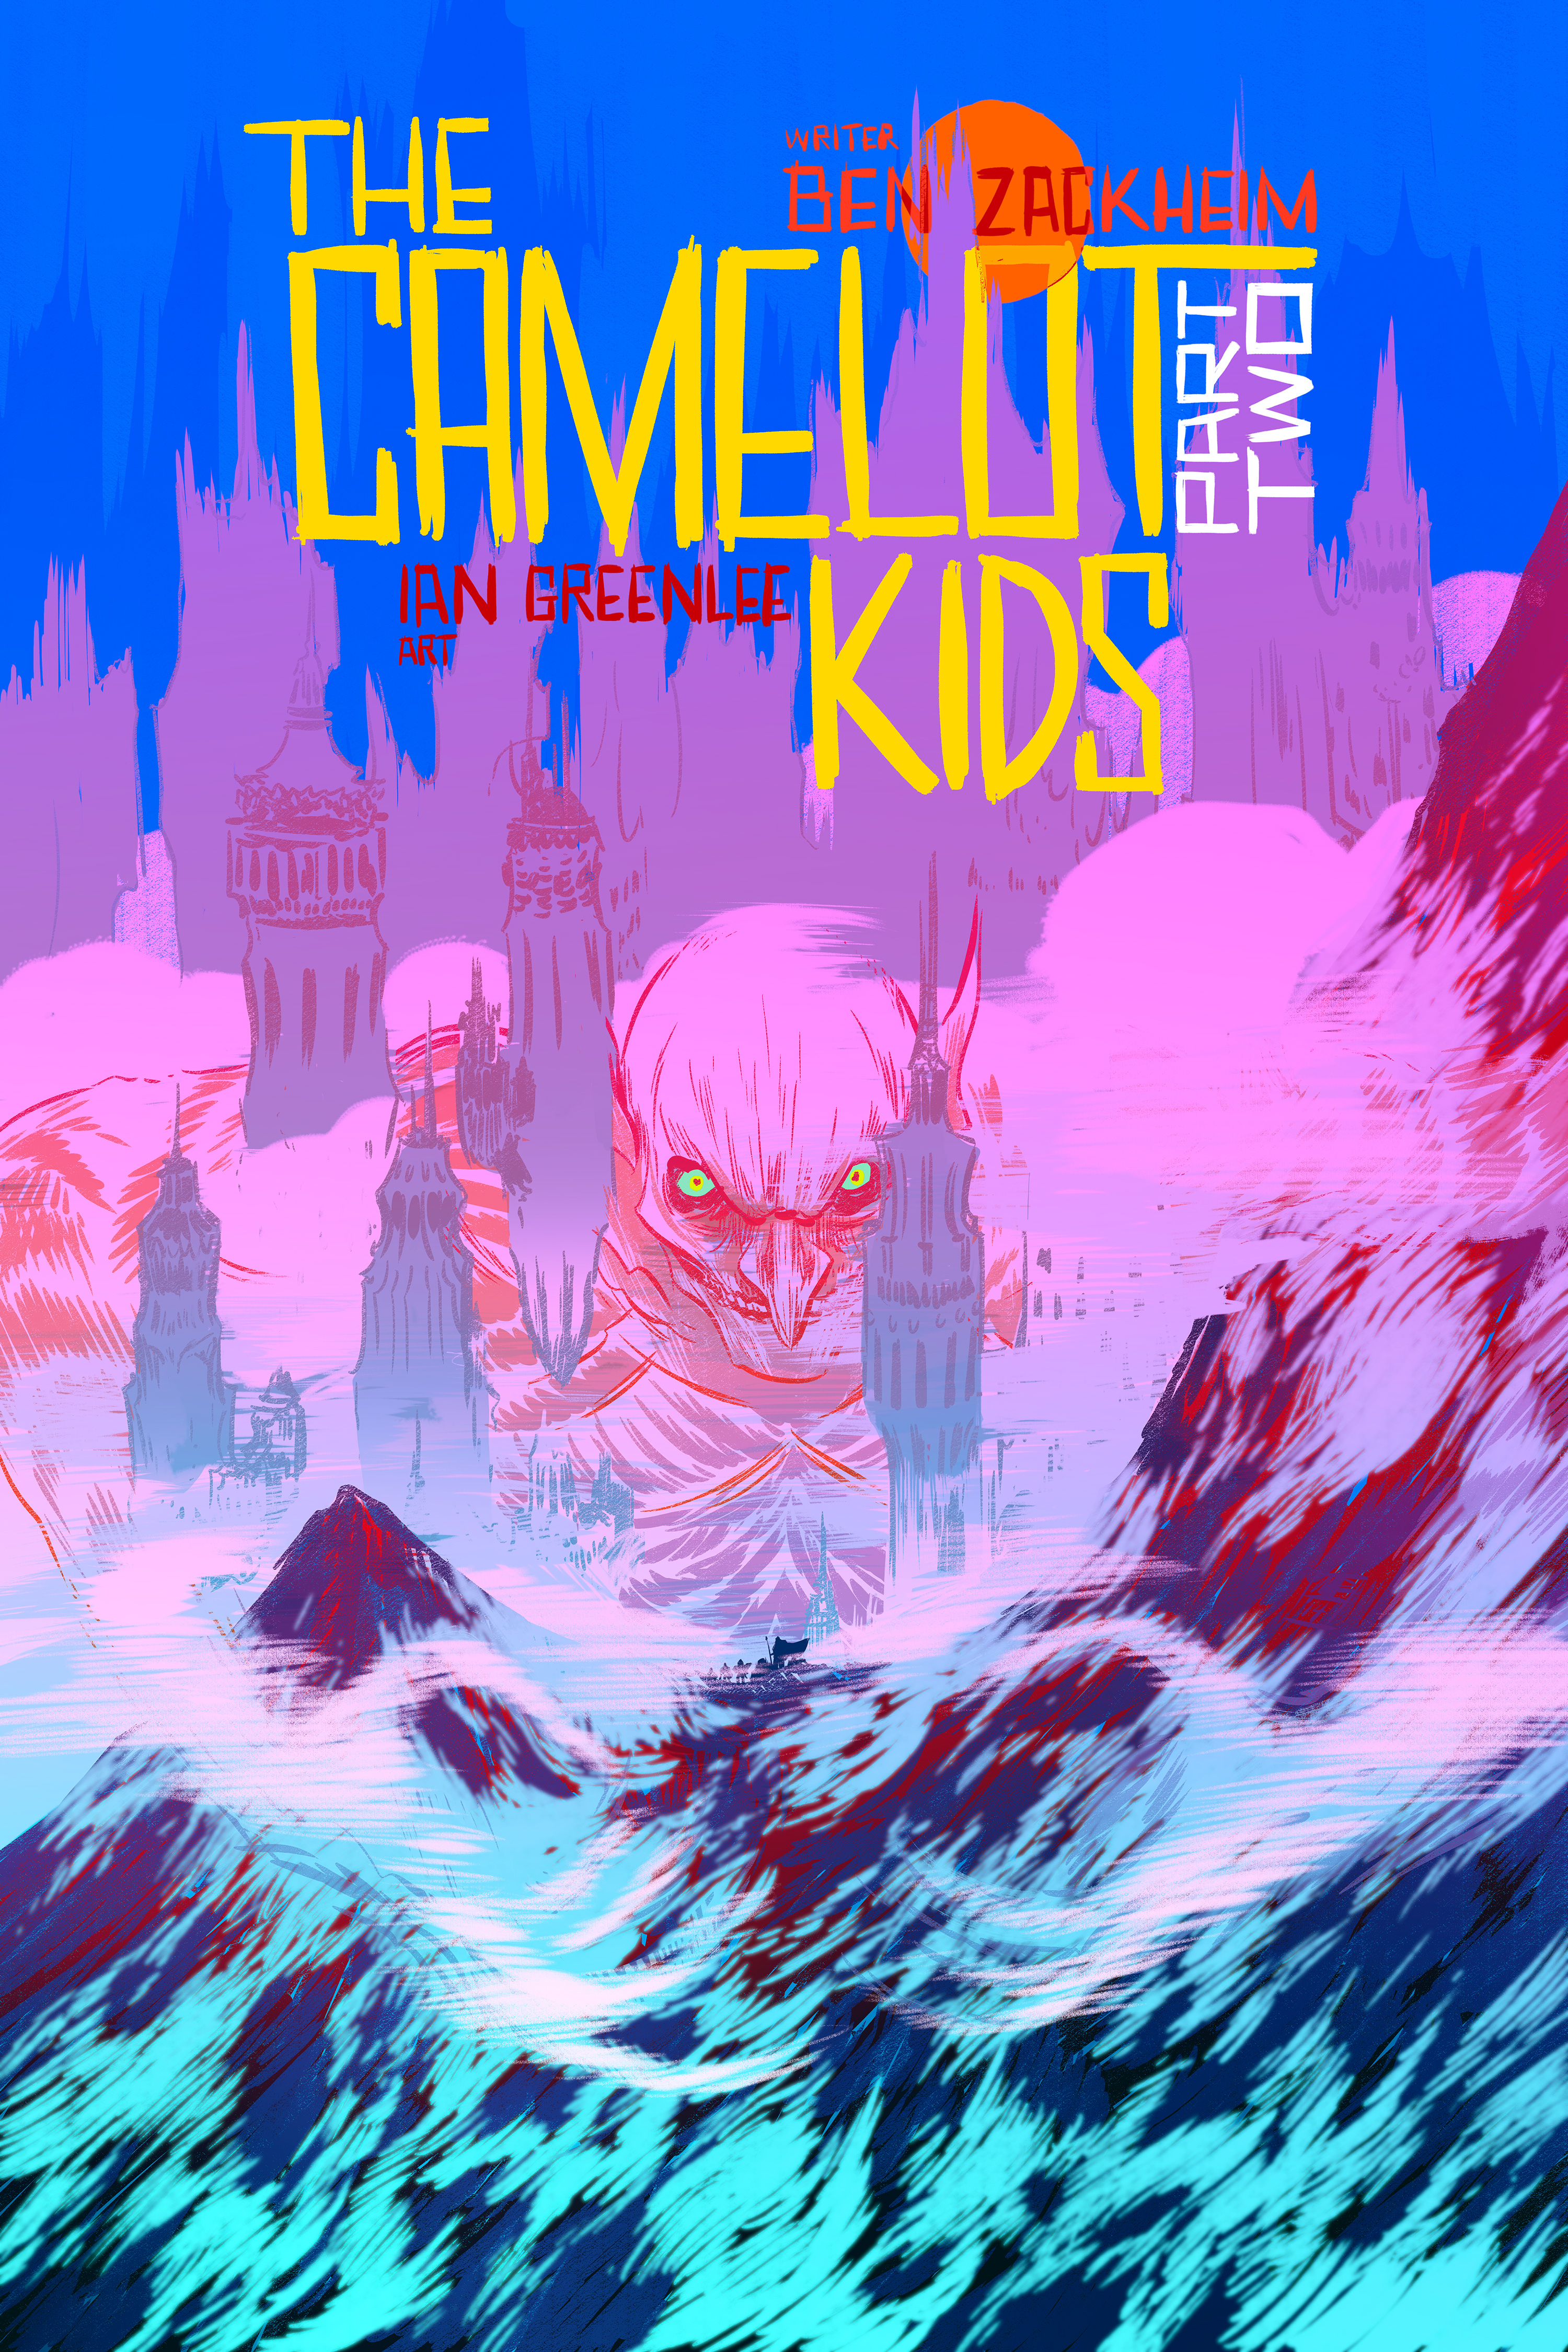 Nathan Fox’s covers for The Camelot Kids